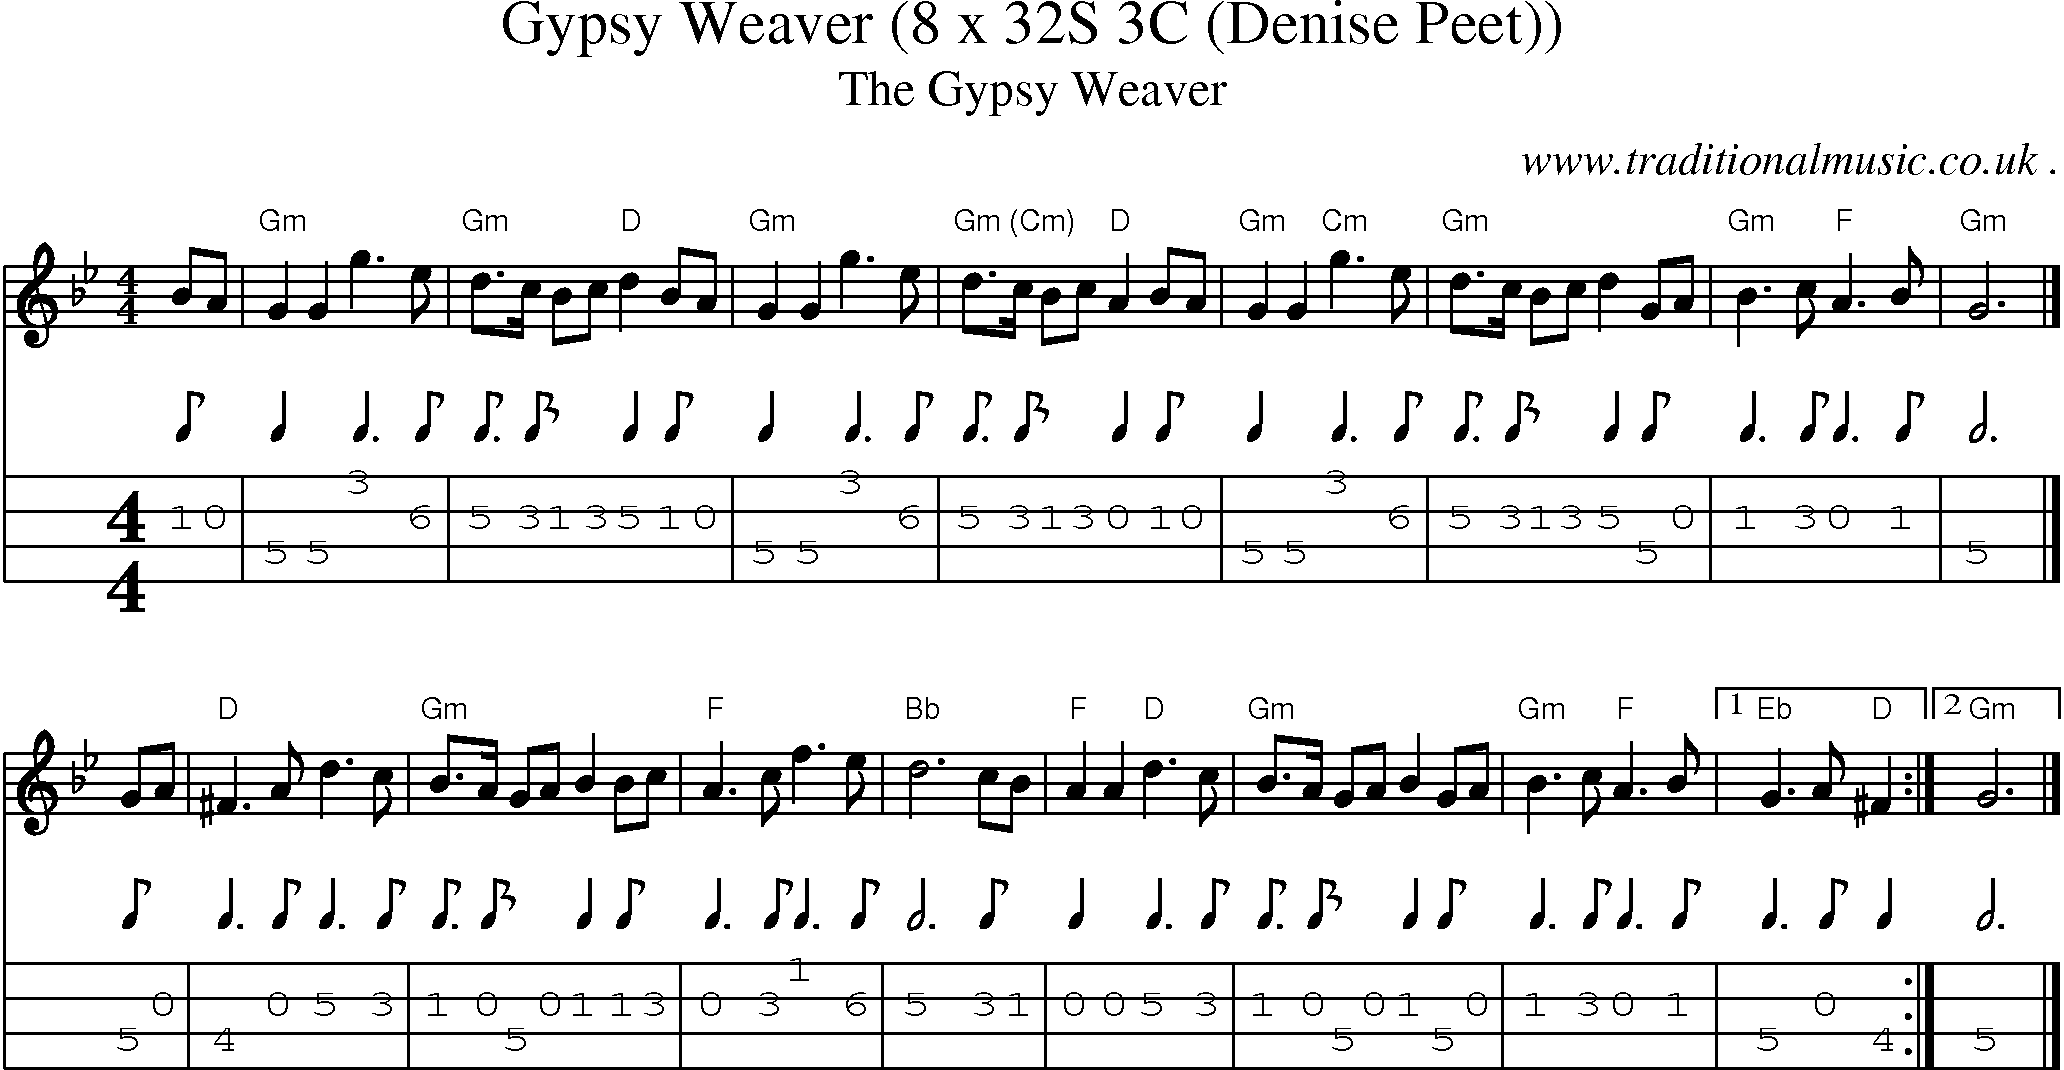 Sheet-music  score, Chords and Mandolin Tabs for Gypsy Weaver 8 X 32s 3c Denise Peet